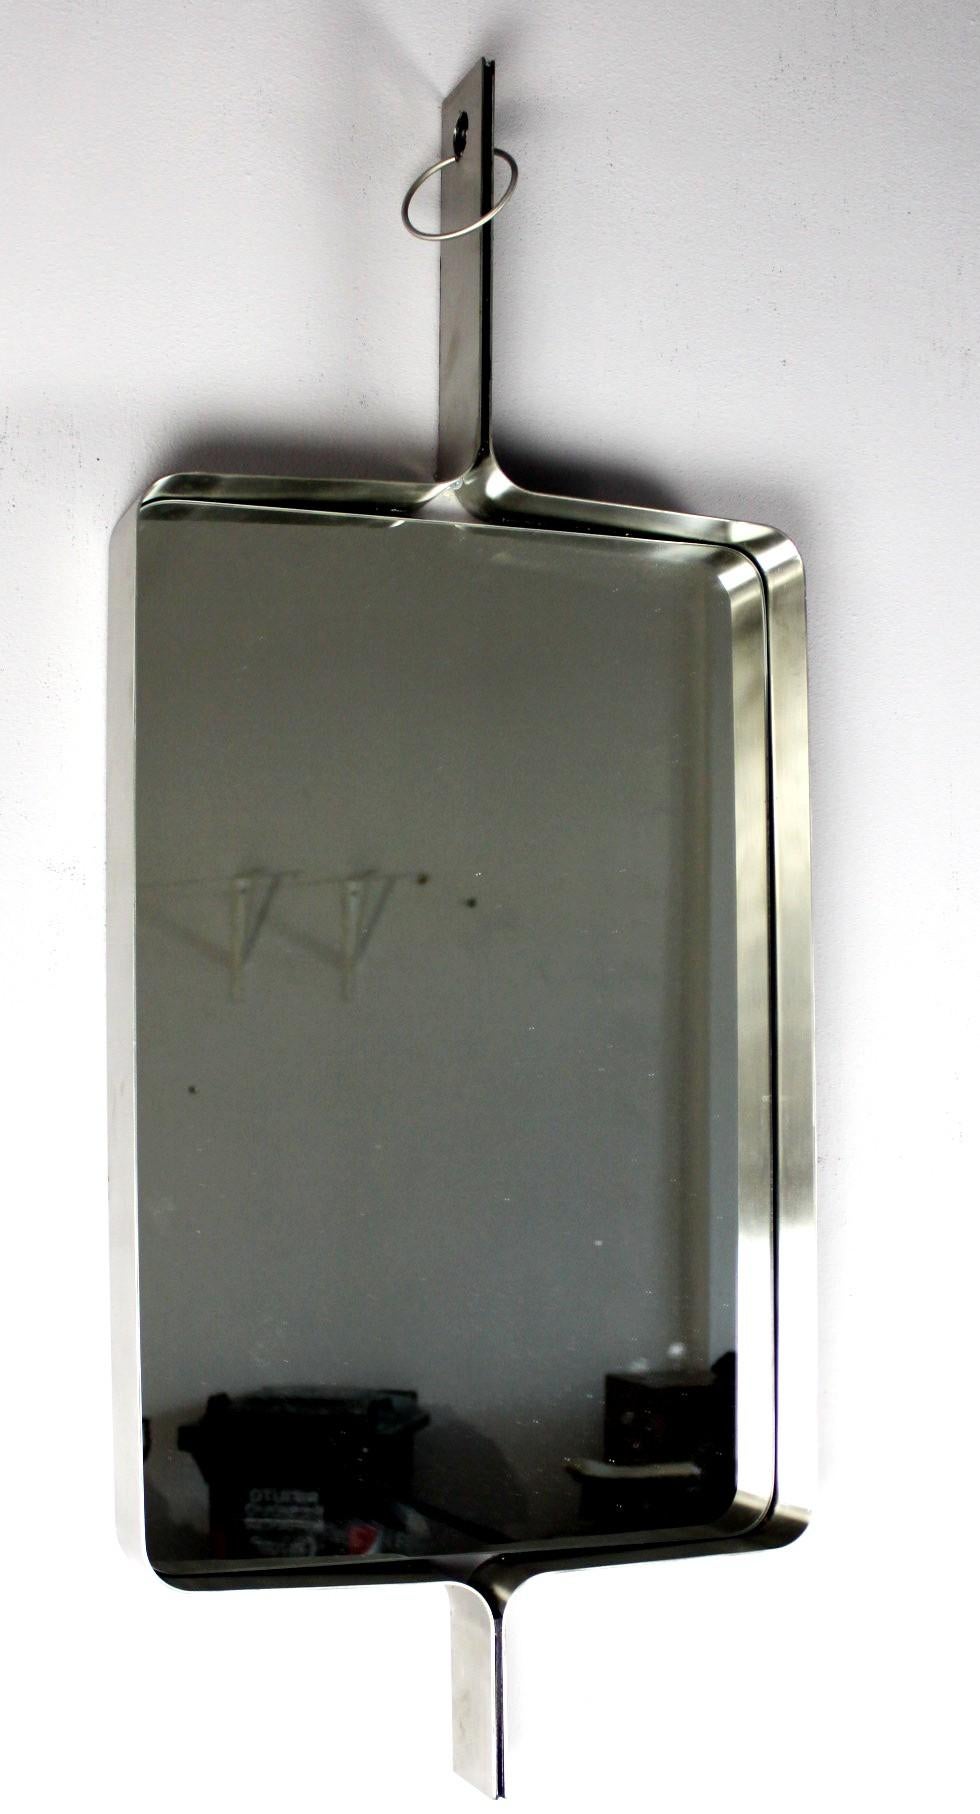 A Xavier-Feal French rectangular brushed stainless steel wall mirror, circa 1970.
Produced by Inox Industrie, circa 1970.
This mirror was previously attributed to Michel Boyer.
Excellent condition with no scratches or dents.
The mirror glass portion